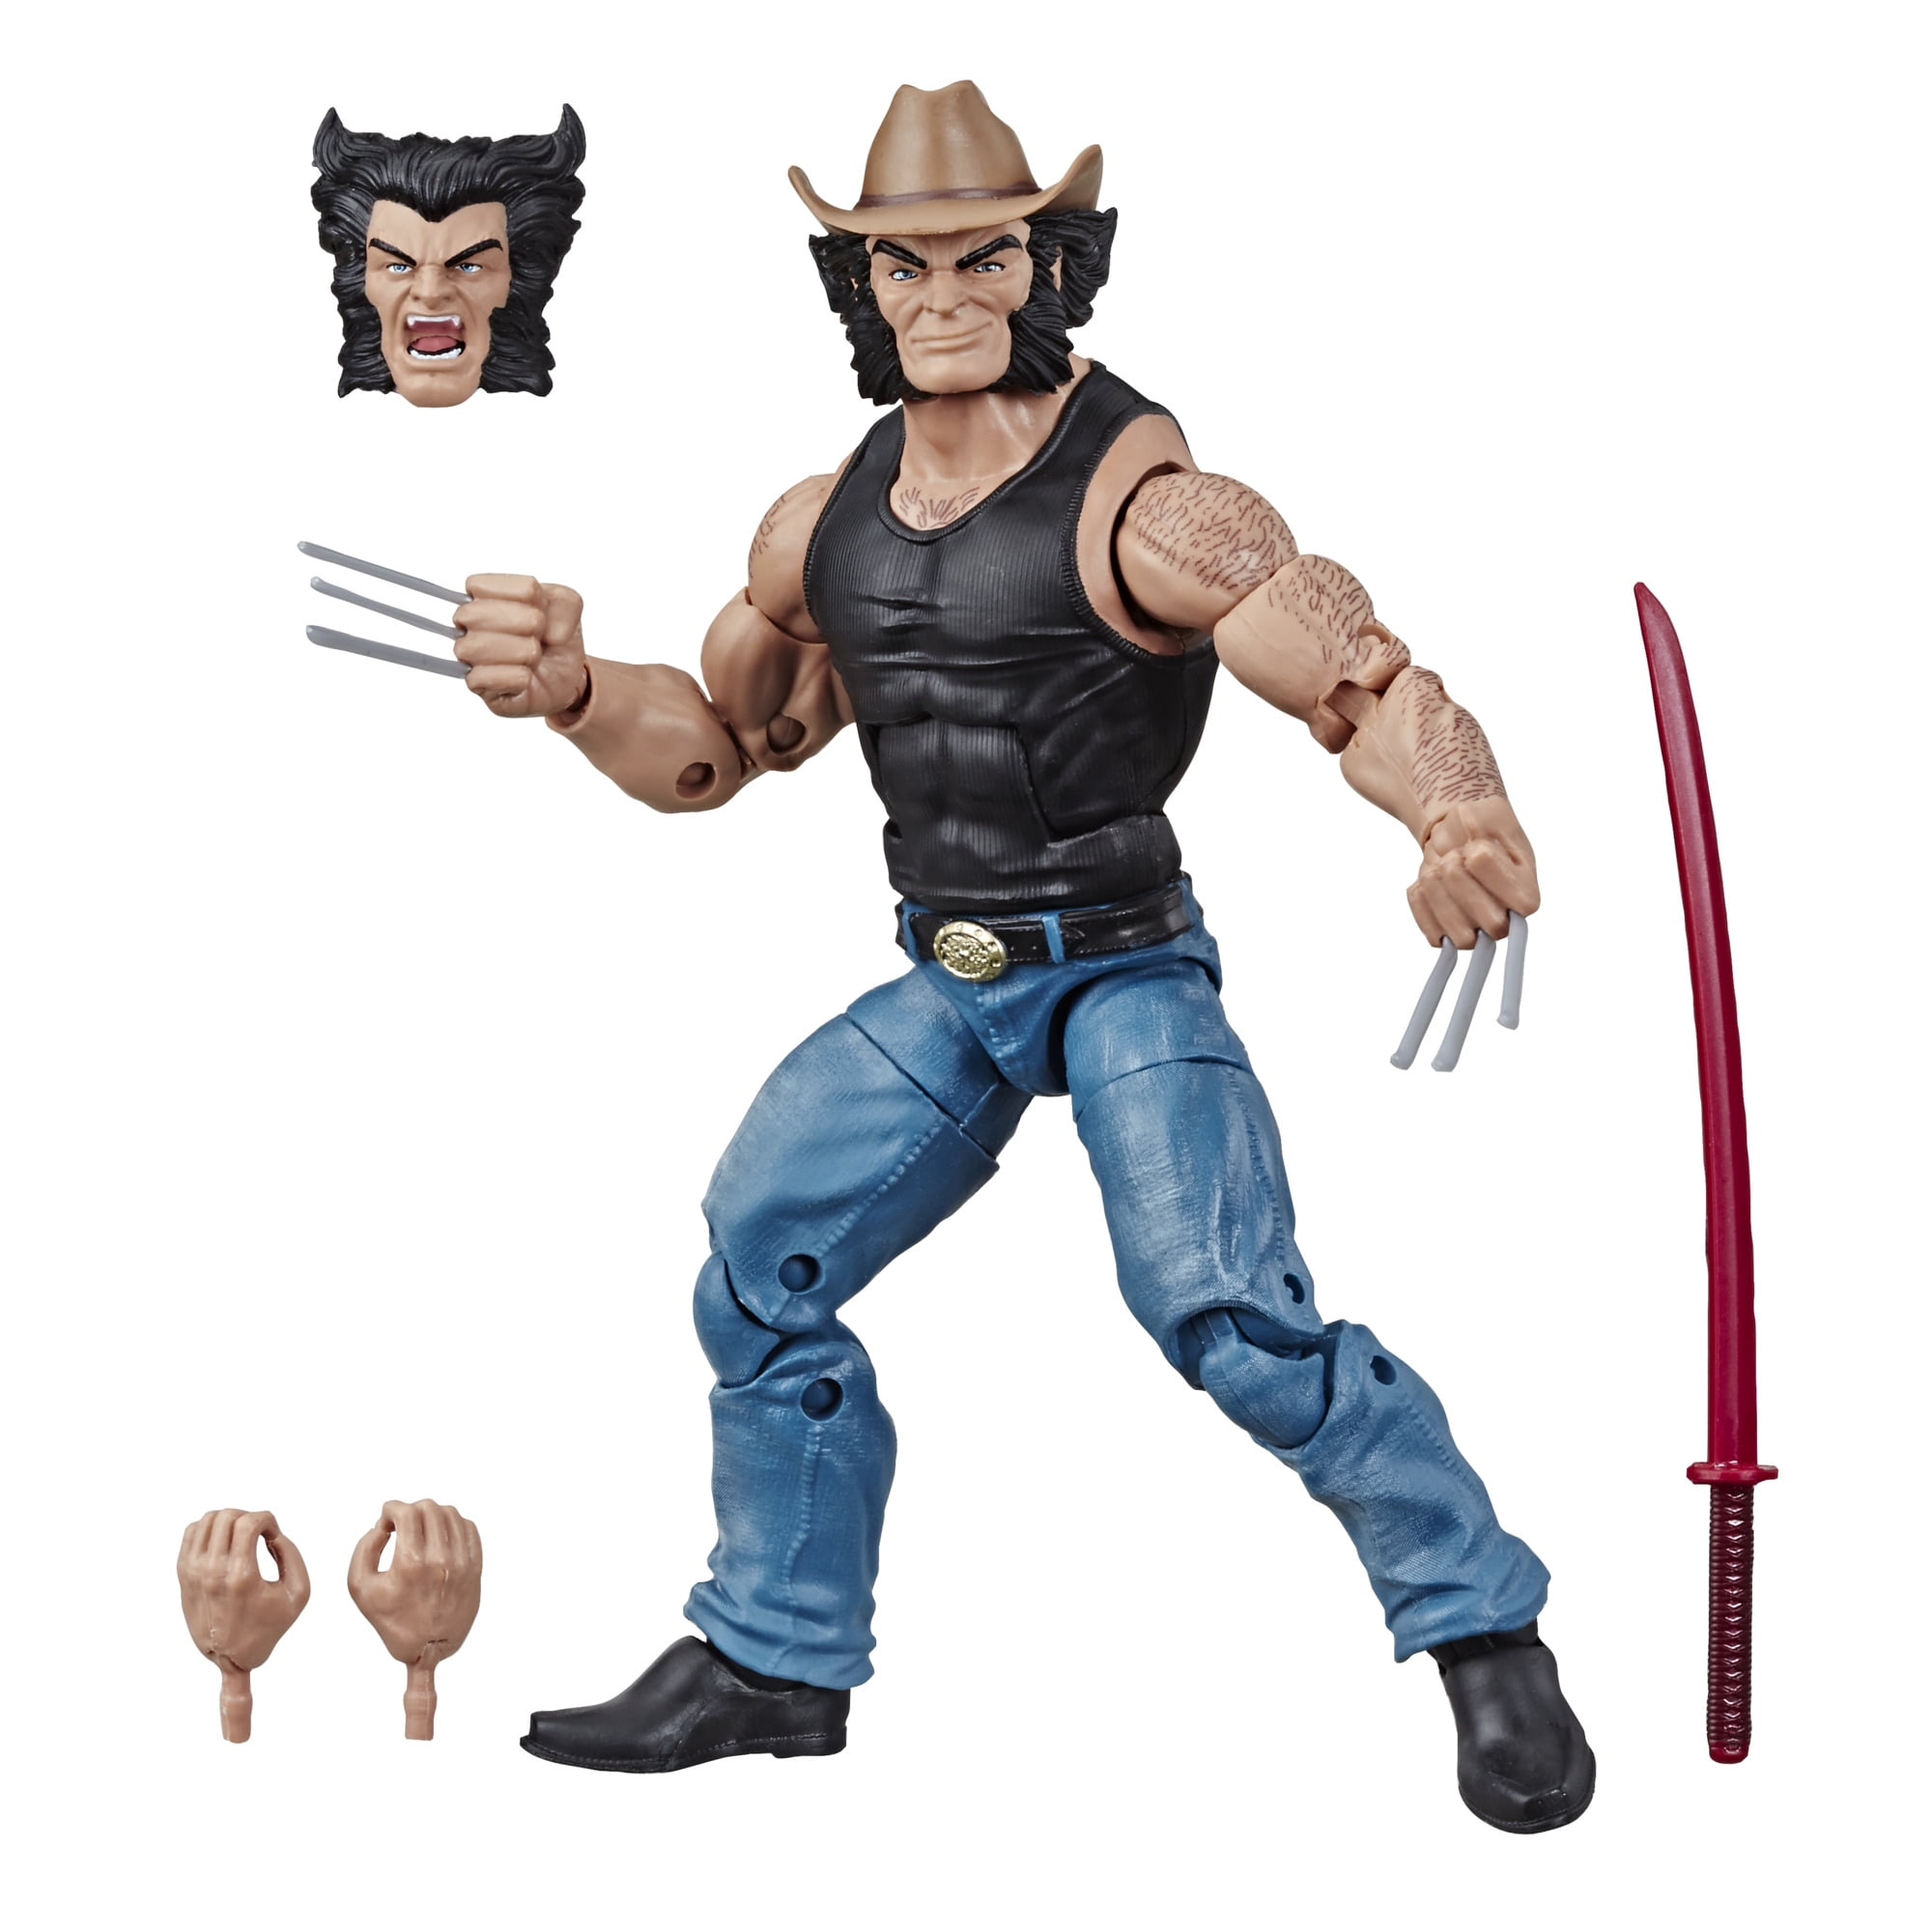 Hasbro Marvel Legends Series Wolverine 6-inch Collectible 2020 Action Figure Toy 